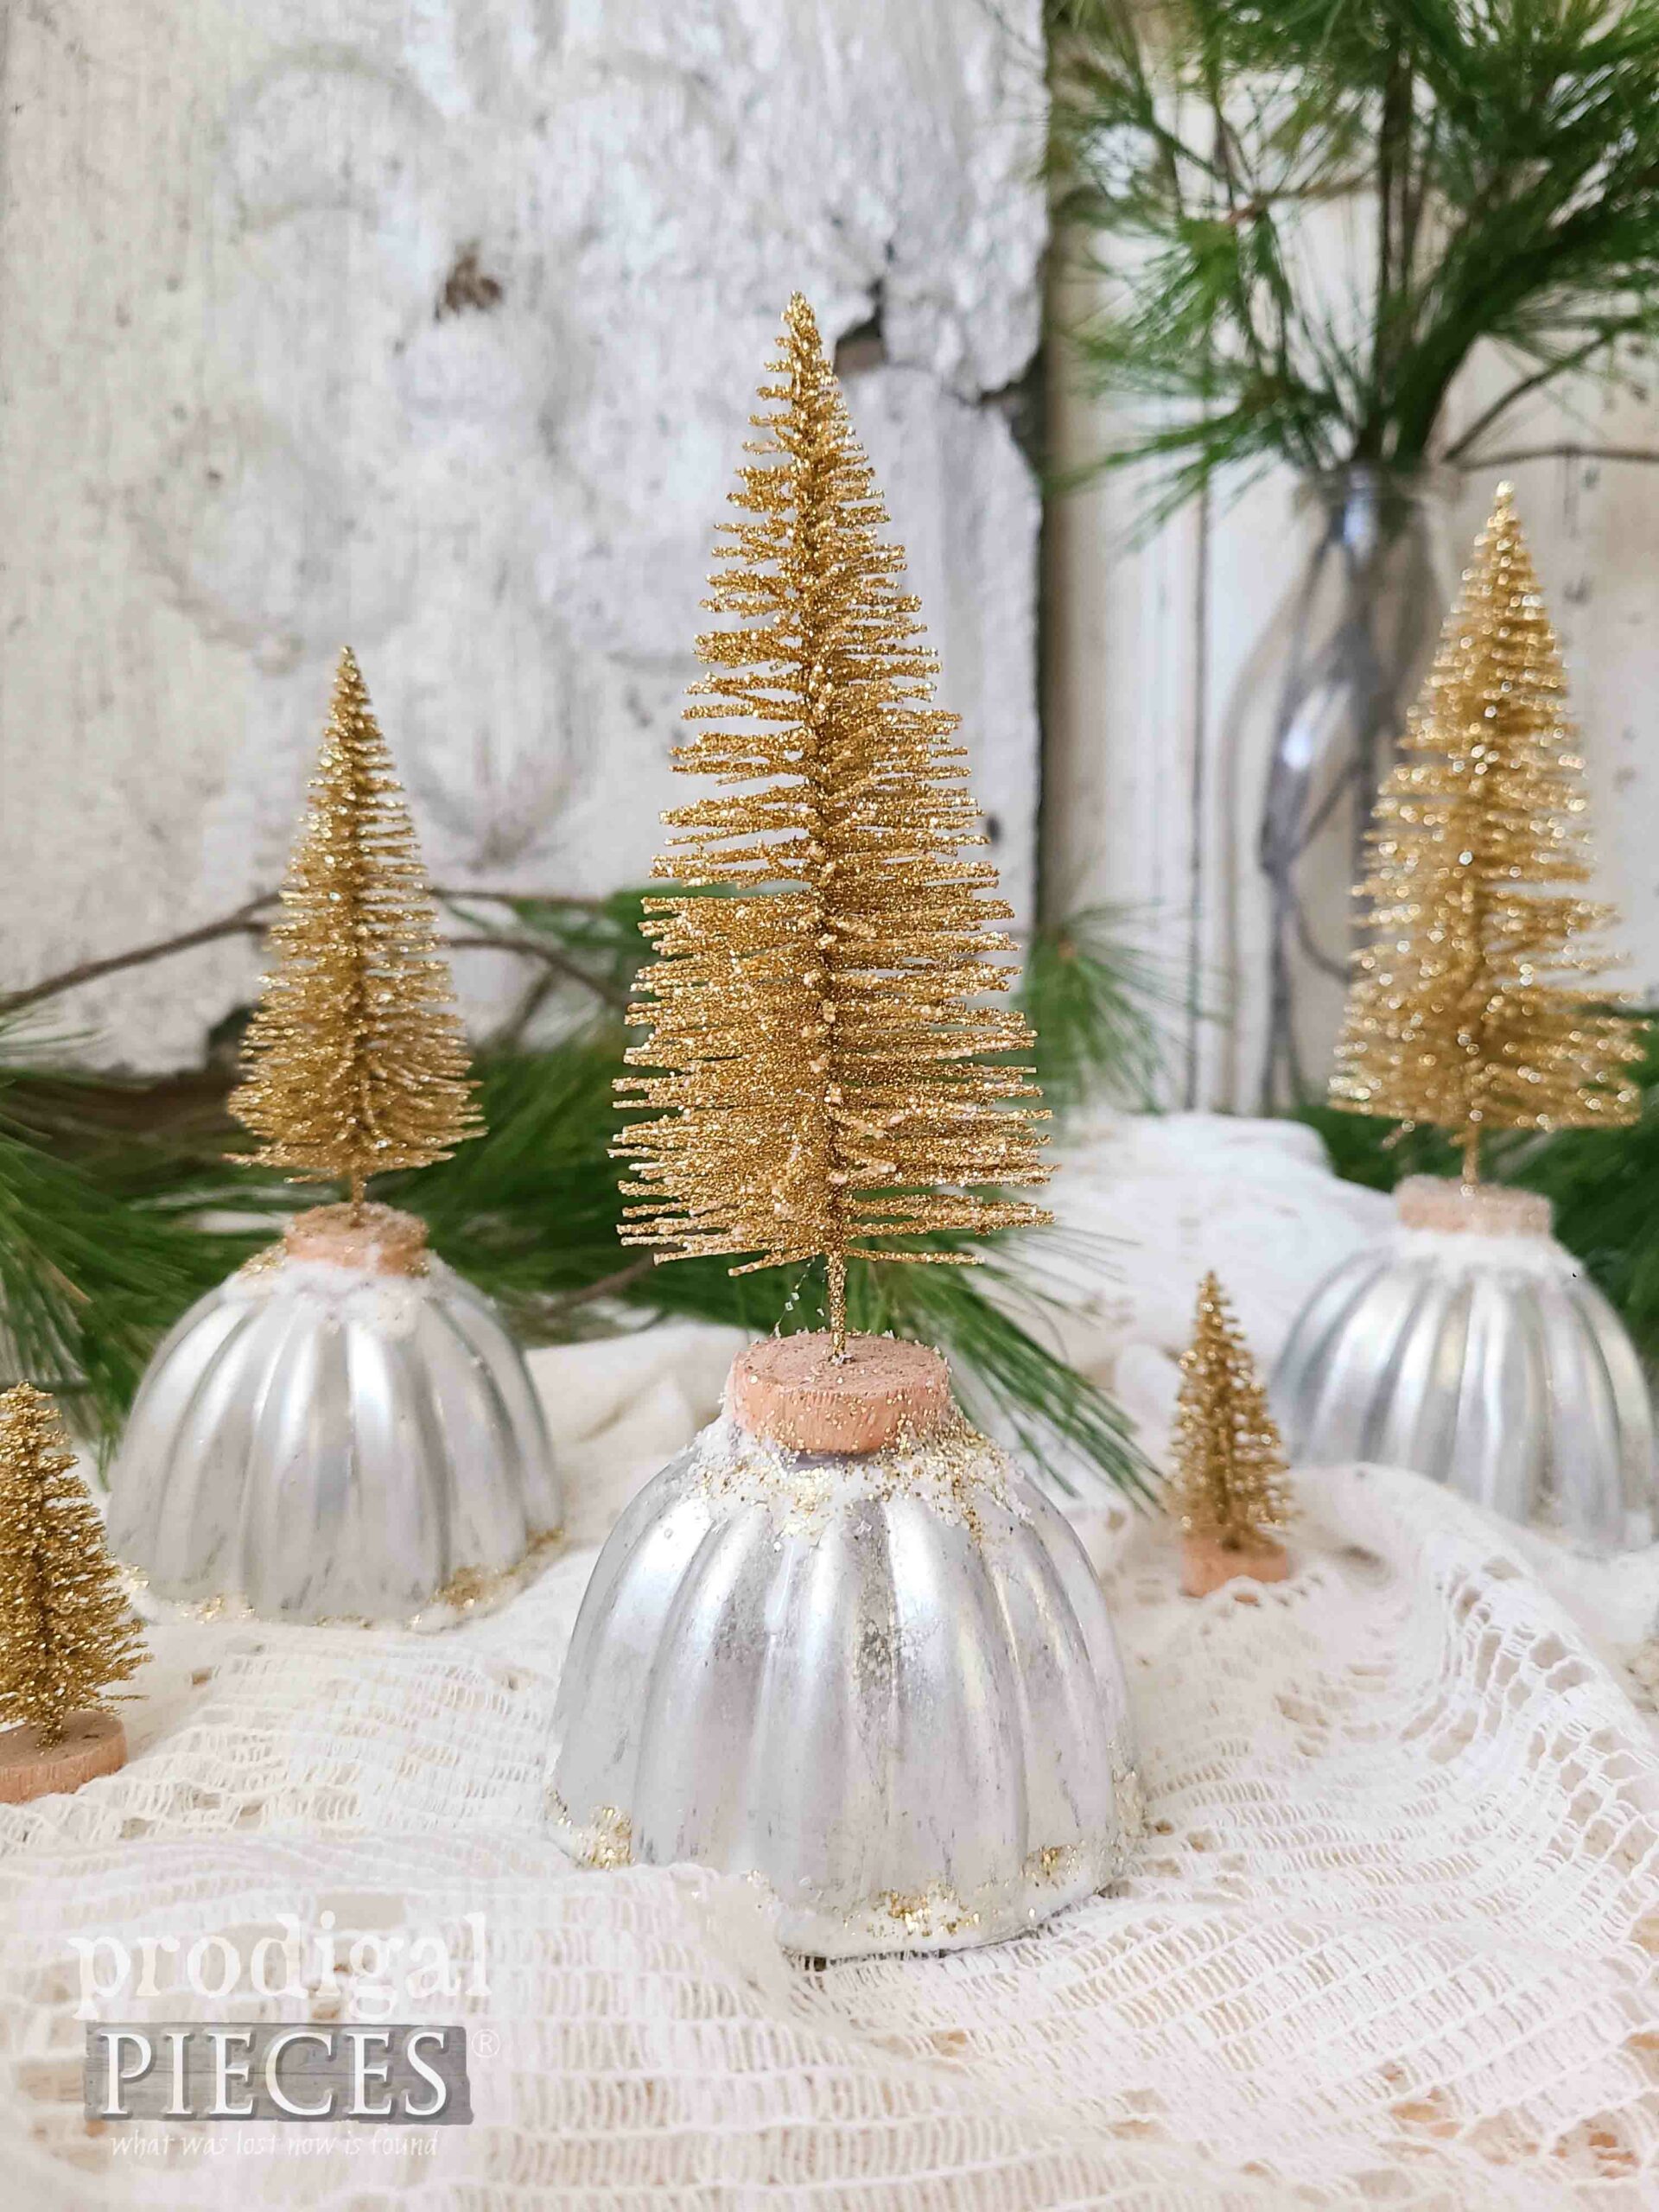 Glittery Gold Bottle Brush Tree on Vintage Jello Molds for Repurposed Christmas Ornaments by Larissa of Prodigal Pieces | prodigalpieces.com #prodigalpieces #farmhouse #Christmas